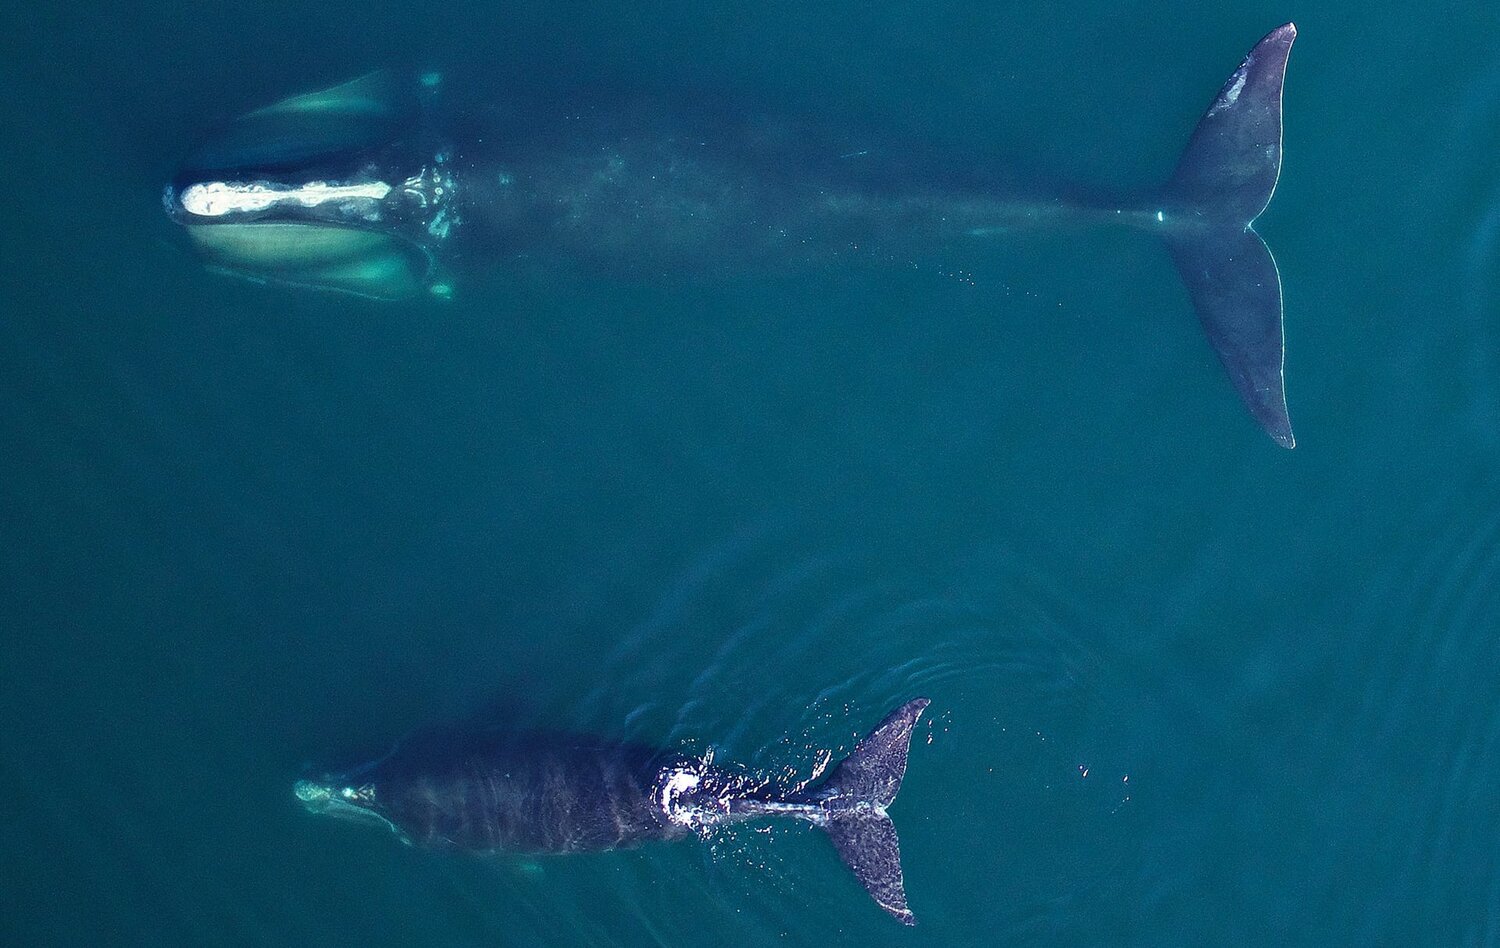 A North Atlantic right whale mother with a calf. More of these whales have been killed than have been born in recent years.